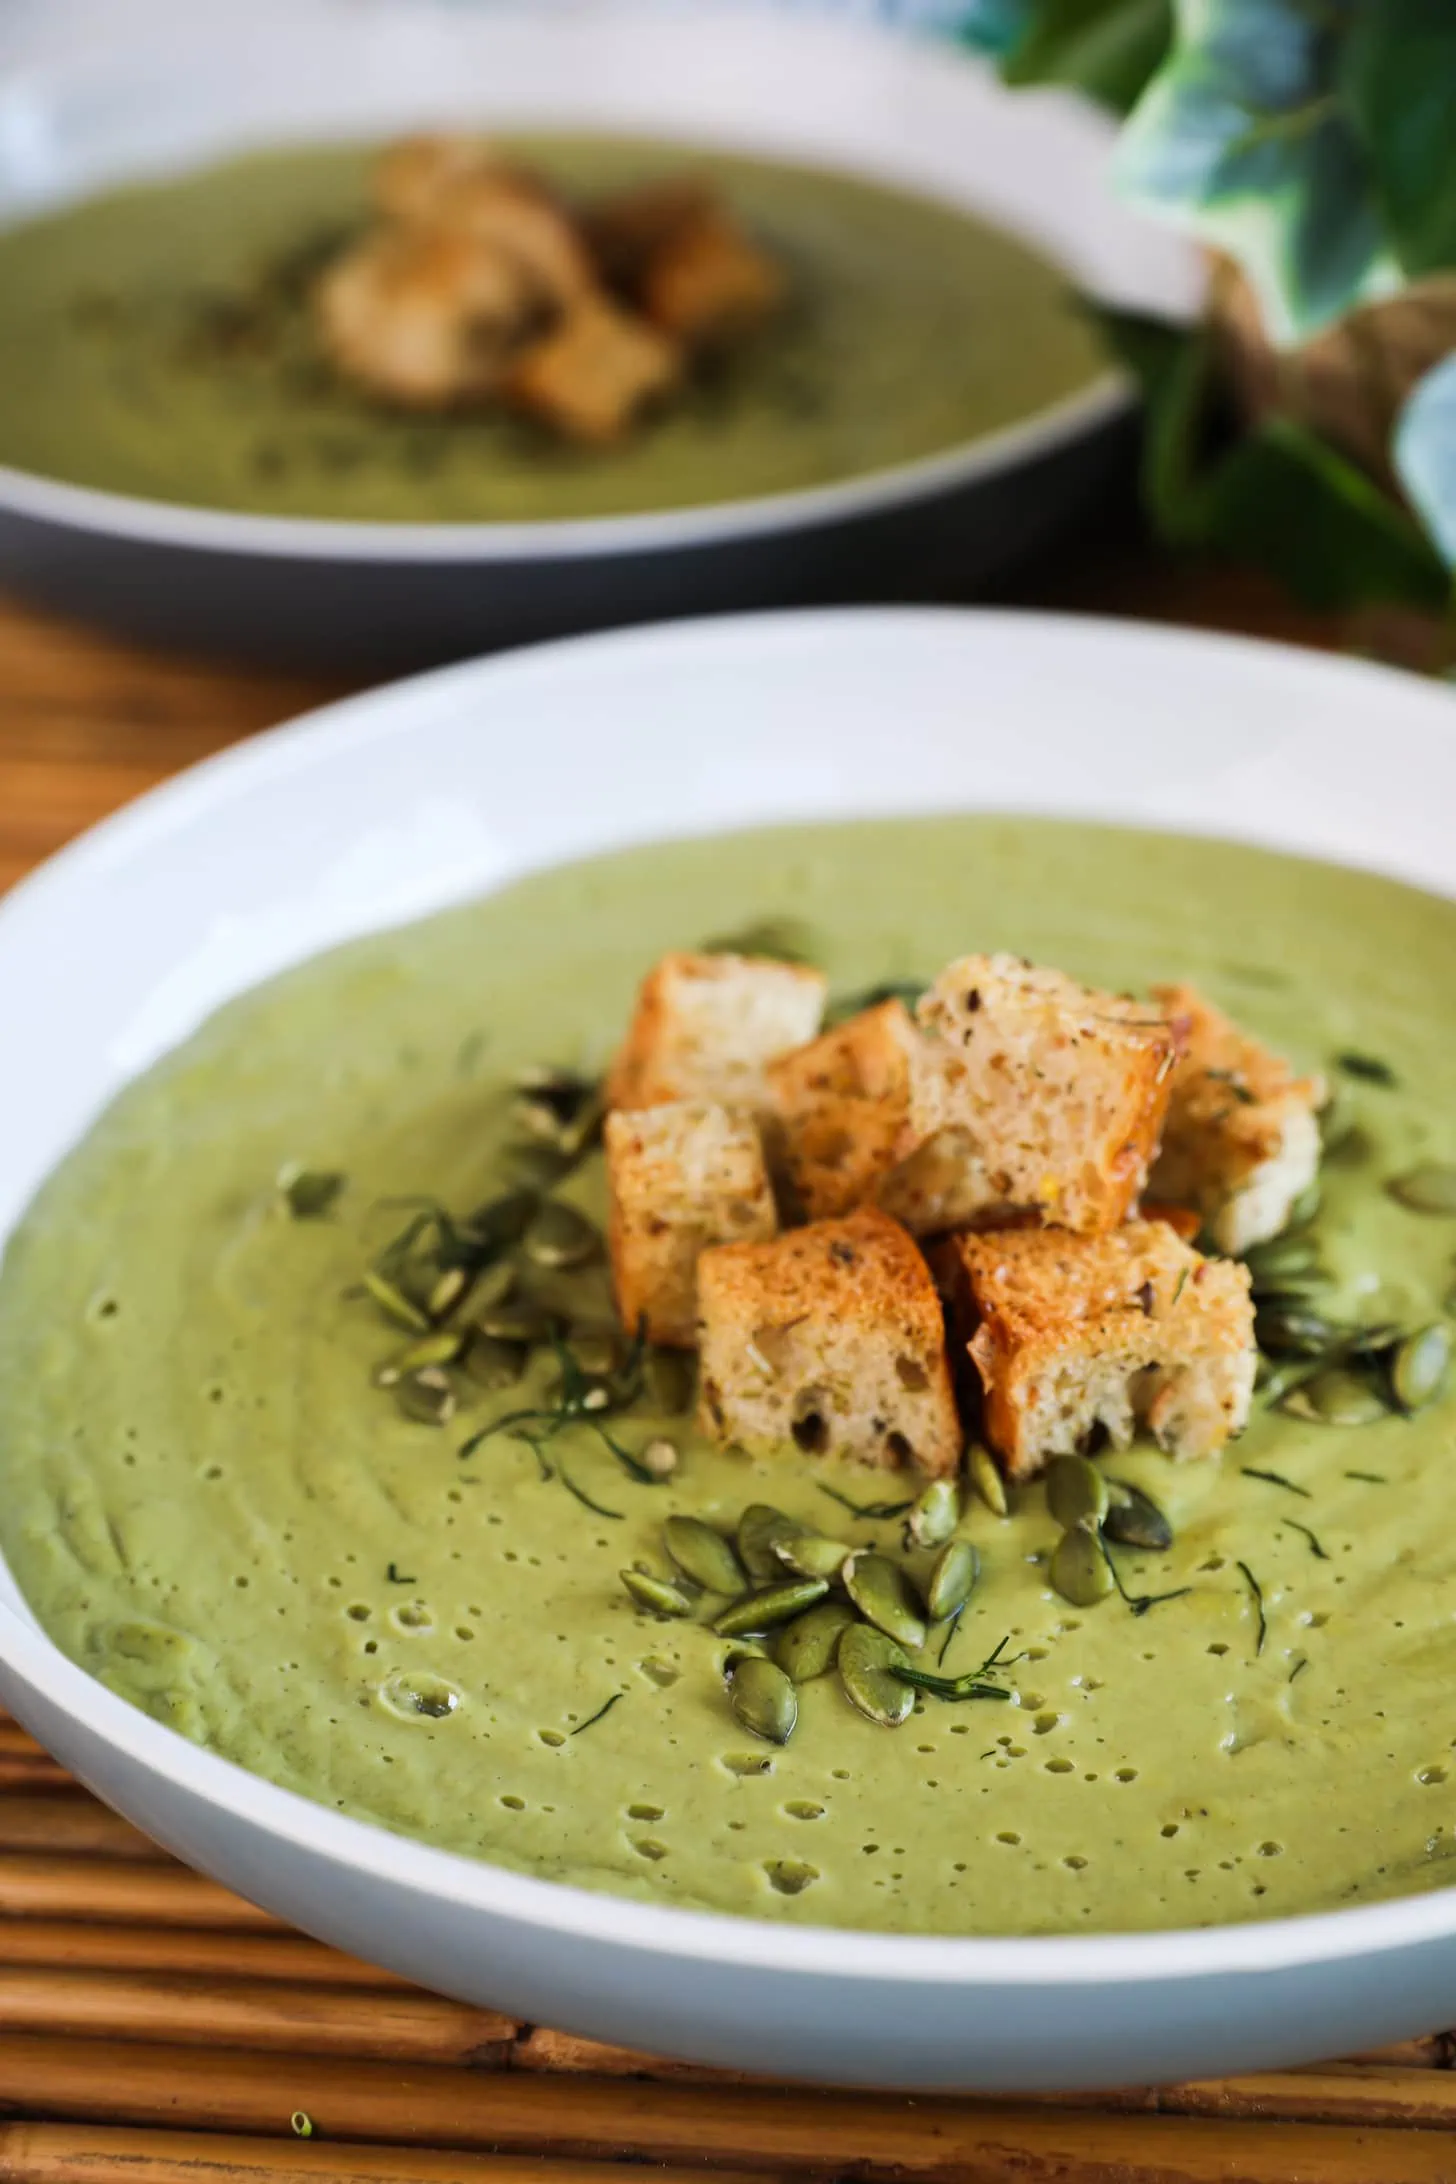 Angled image of green soup topped with croutons and seeds.